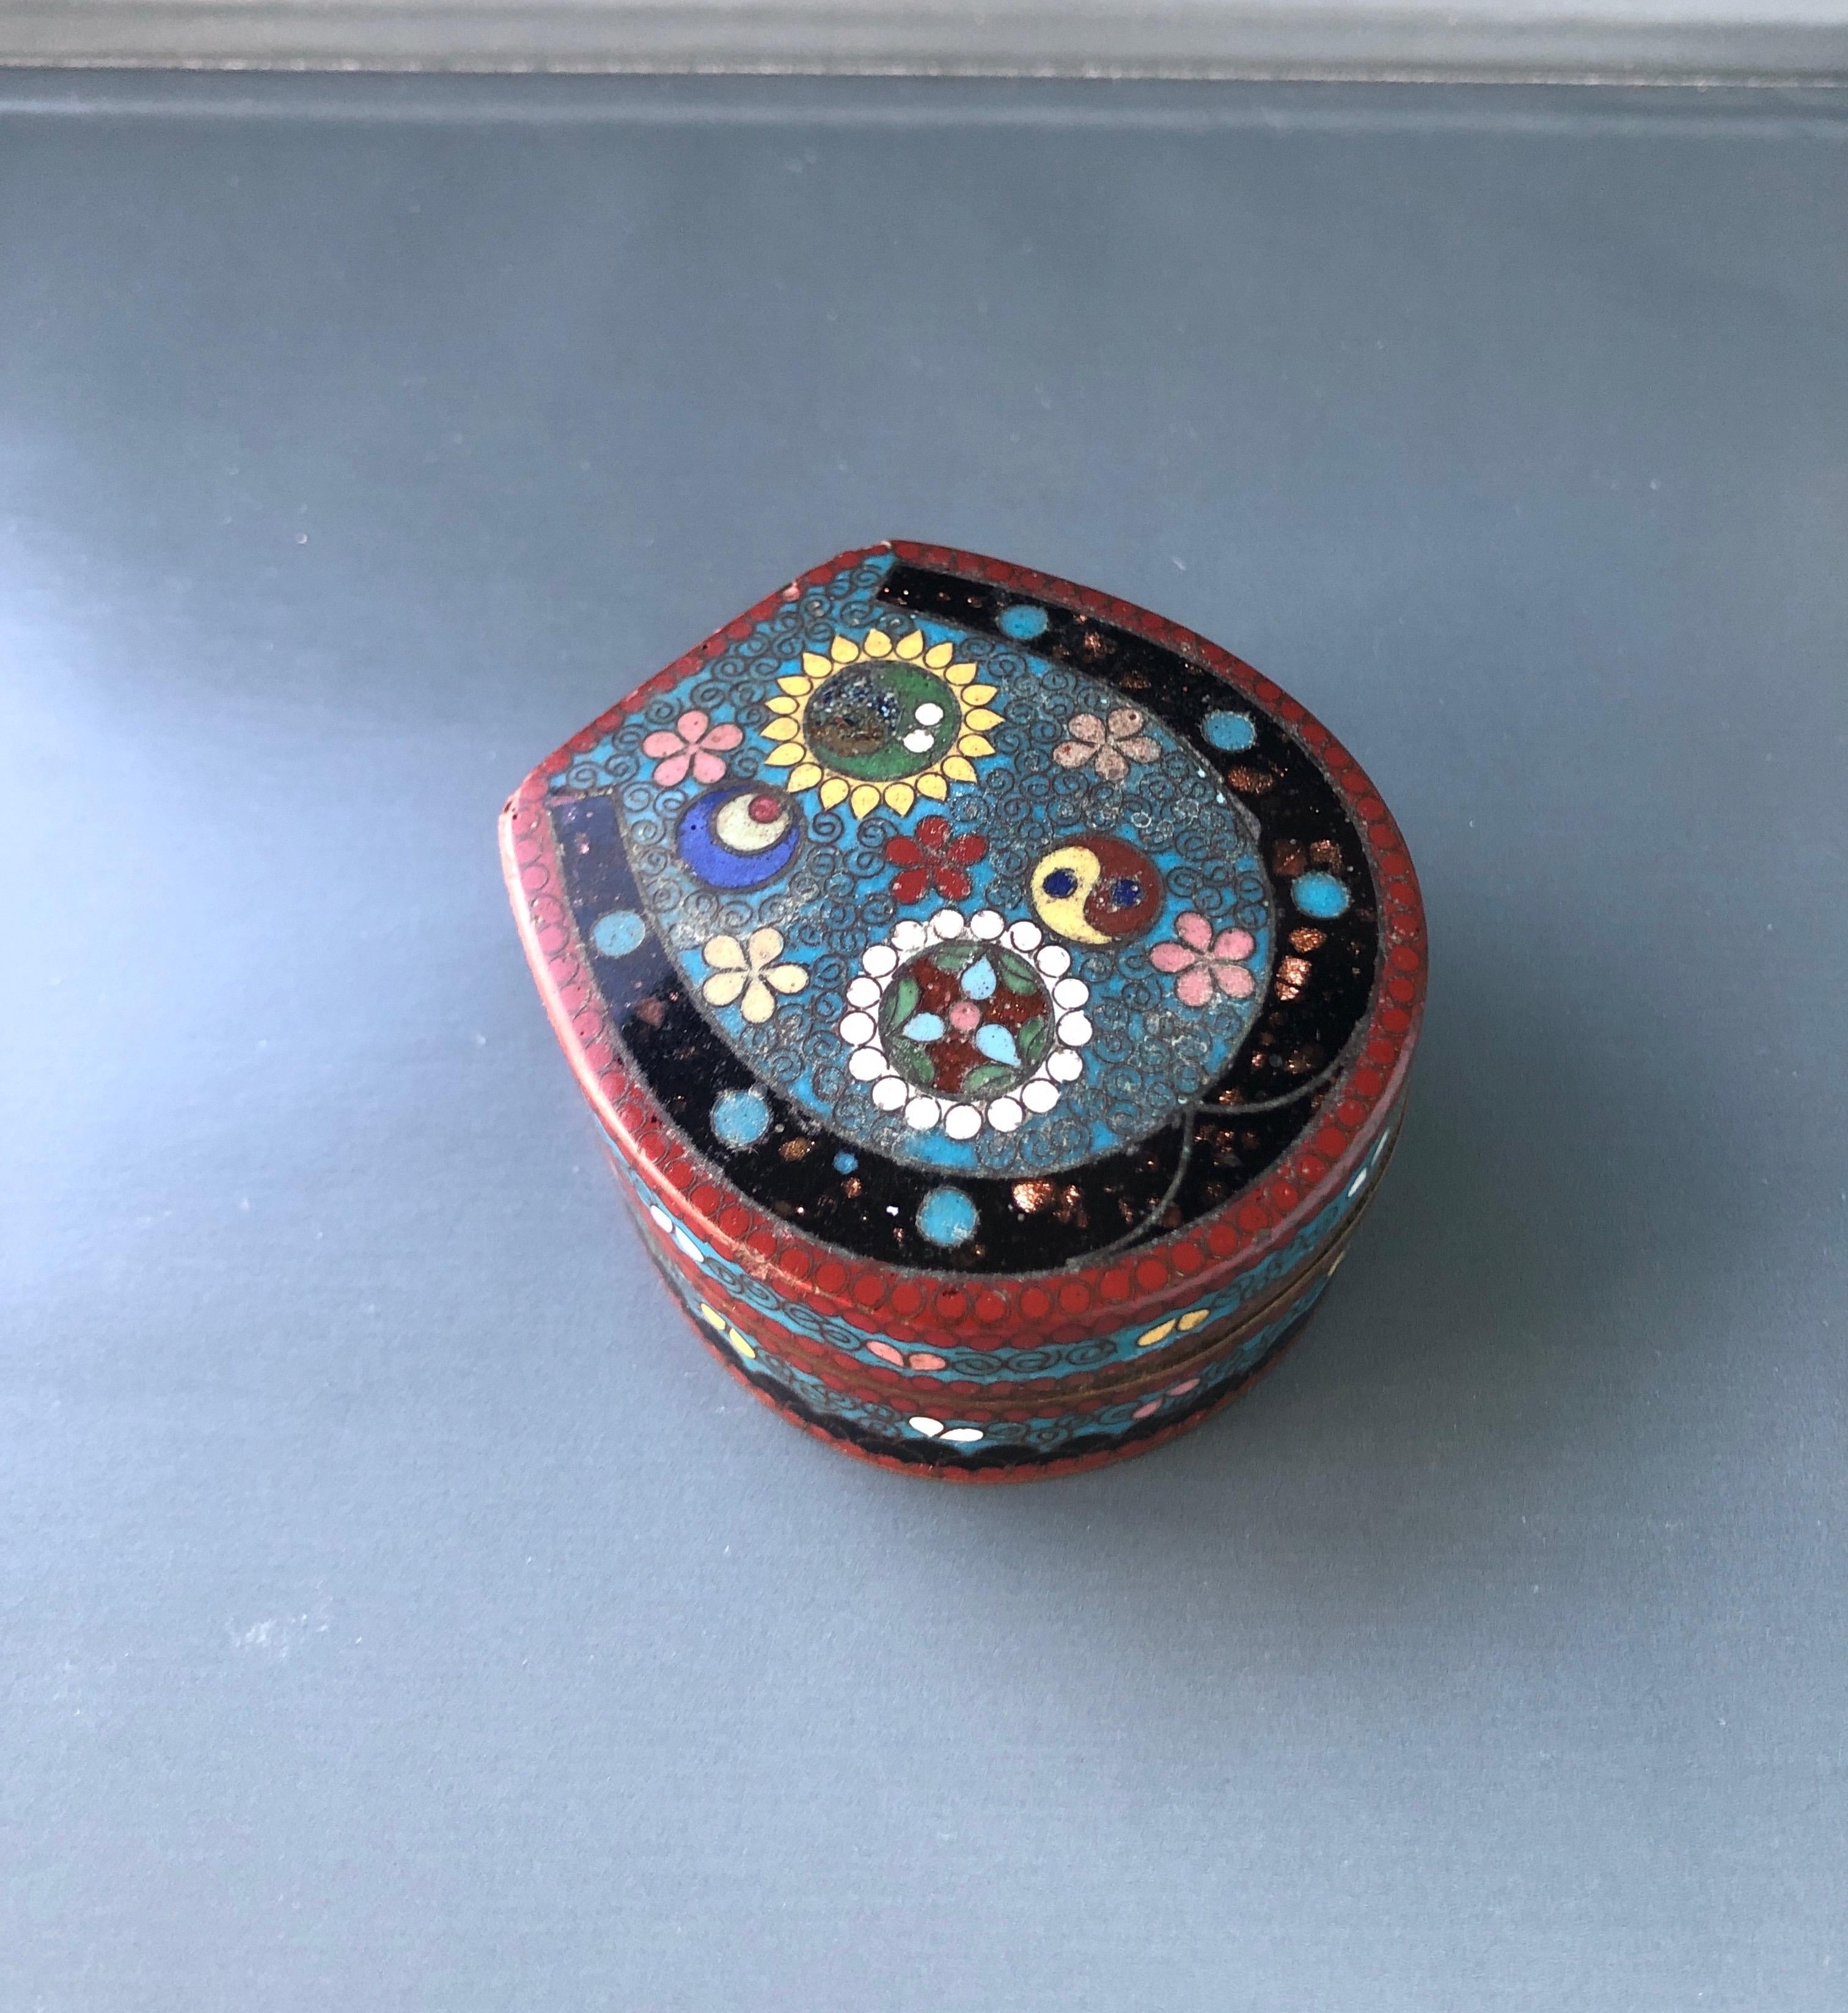 Vintage Petite Cloisonné trinket box
In shades of blue, brown and white with the Ying and Yang symbols
Size: 2.5 x 2.5 x 1.